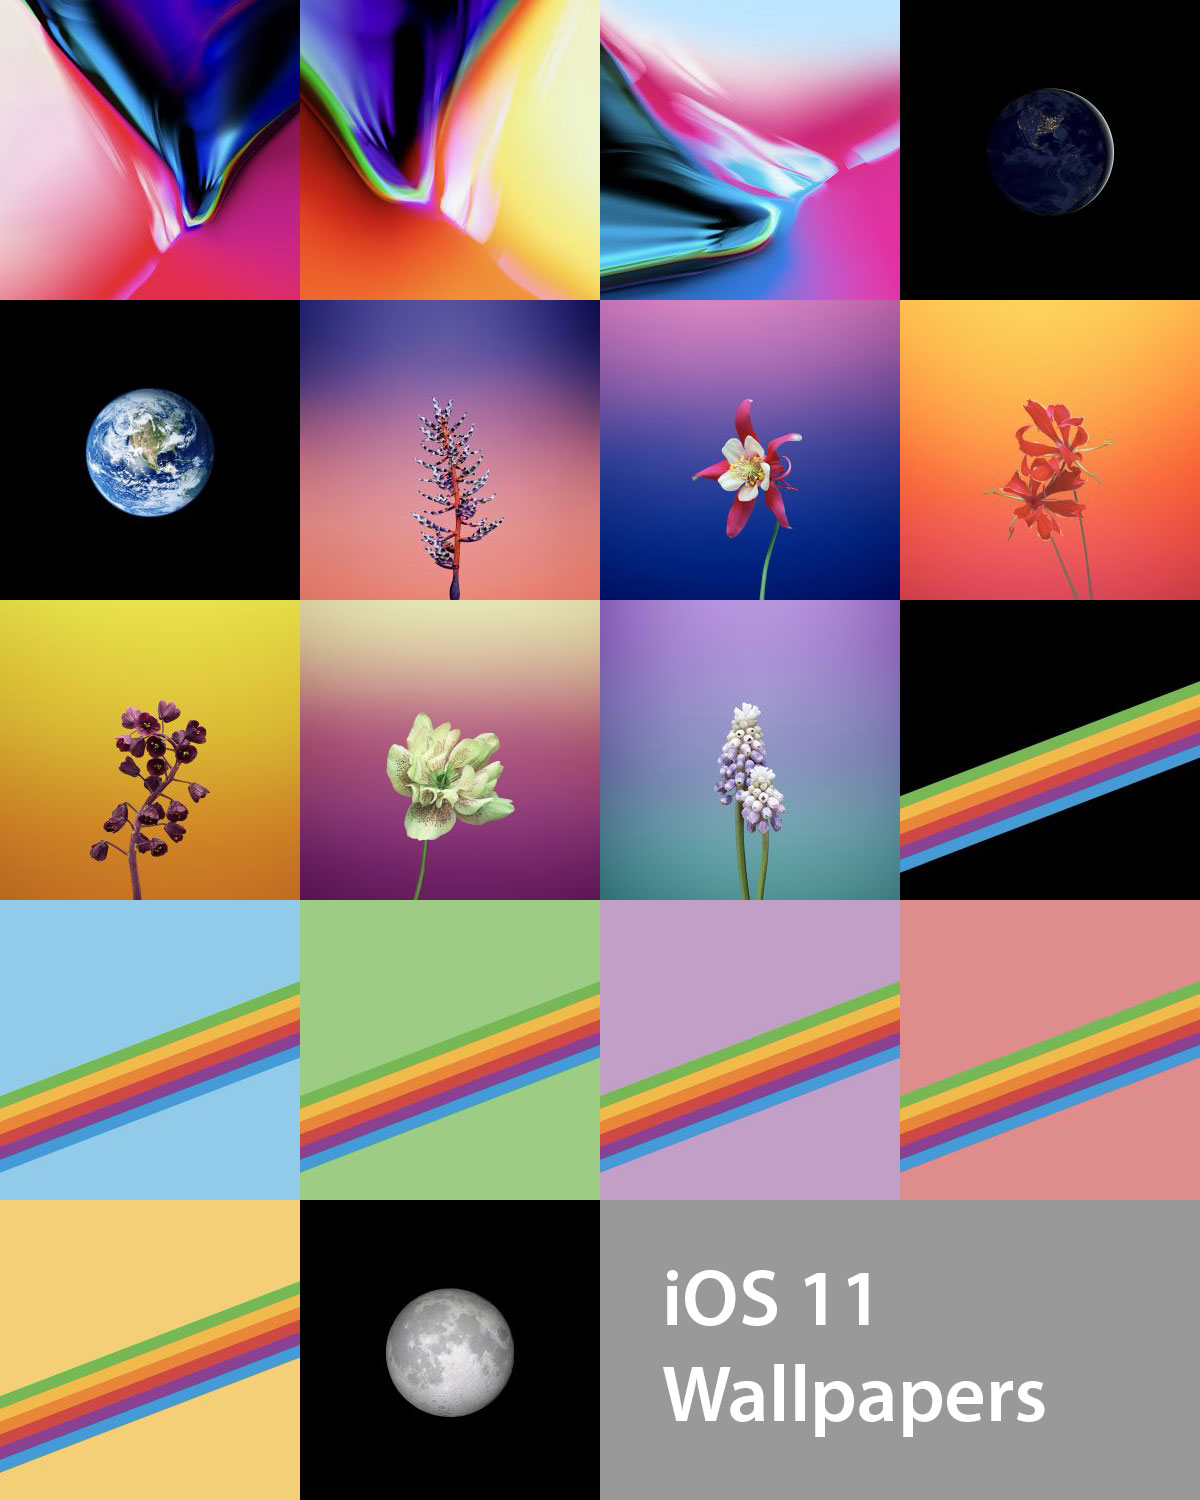 Download The Official iOS 11 Wallpapers For iPhone And iPad